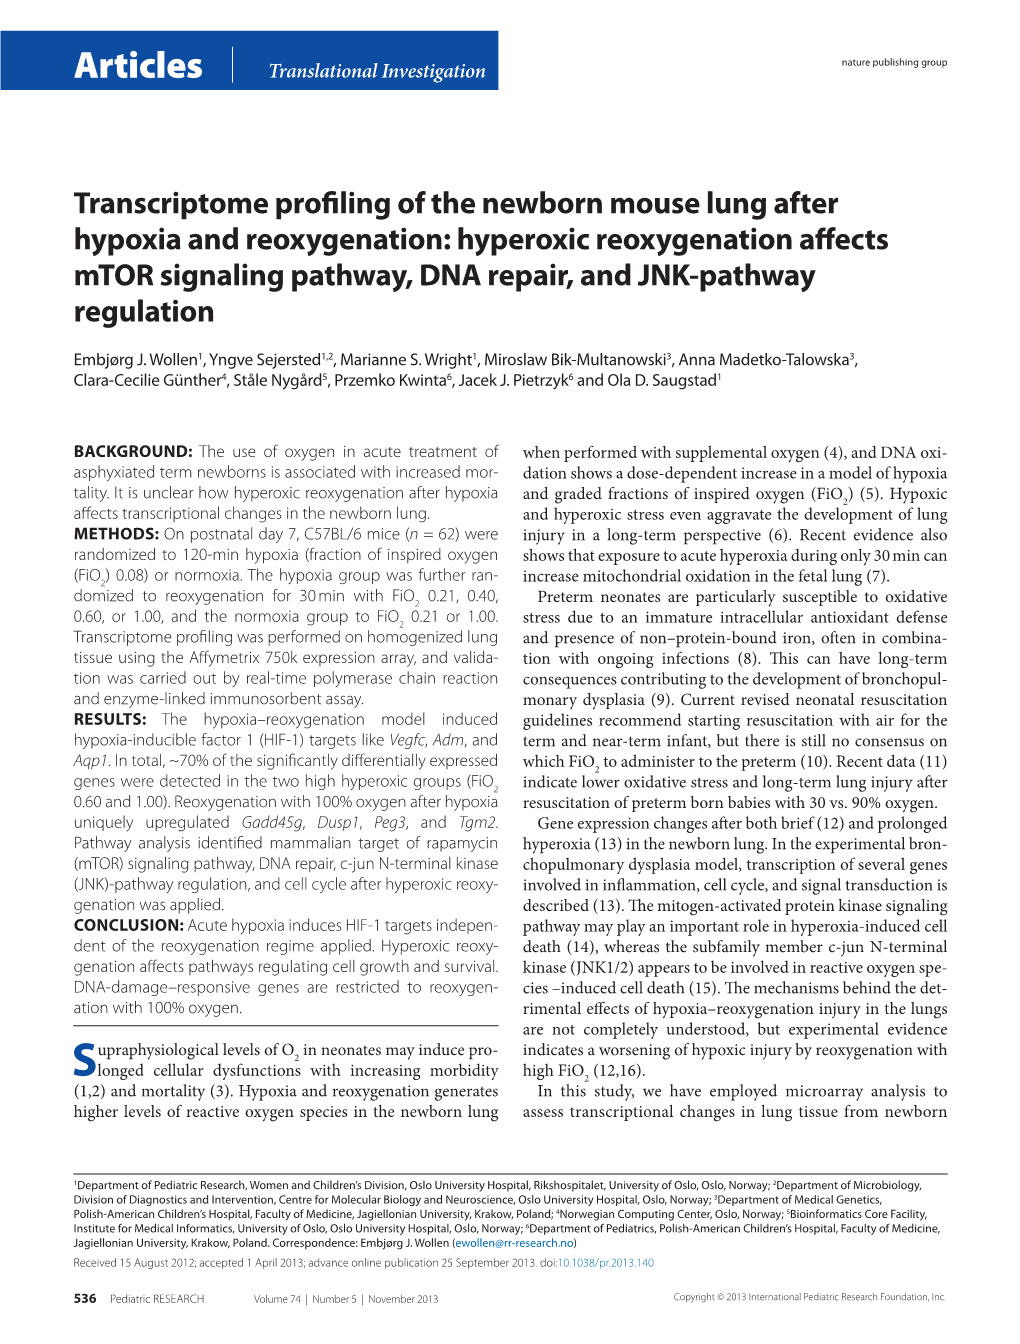 Transcriptome Profiling of the Newborn Mouse Lung After Hypoxia and Reoxygenation